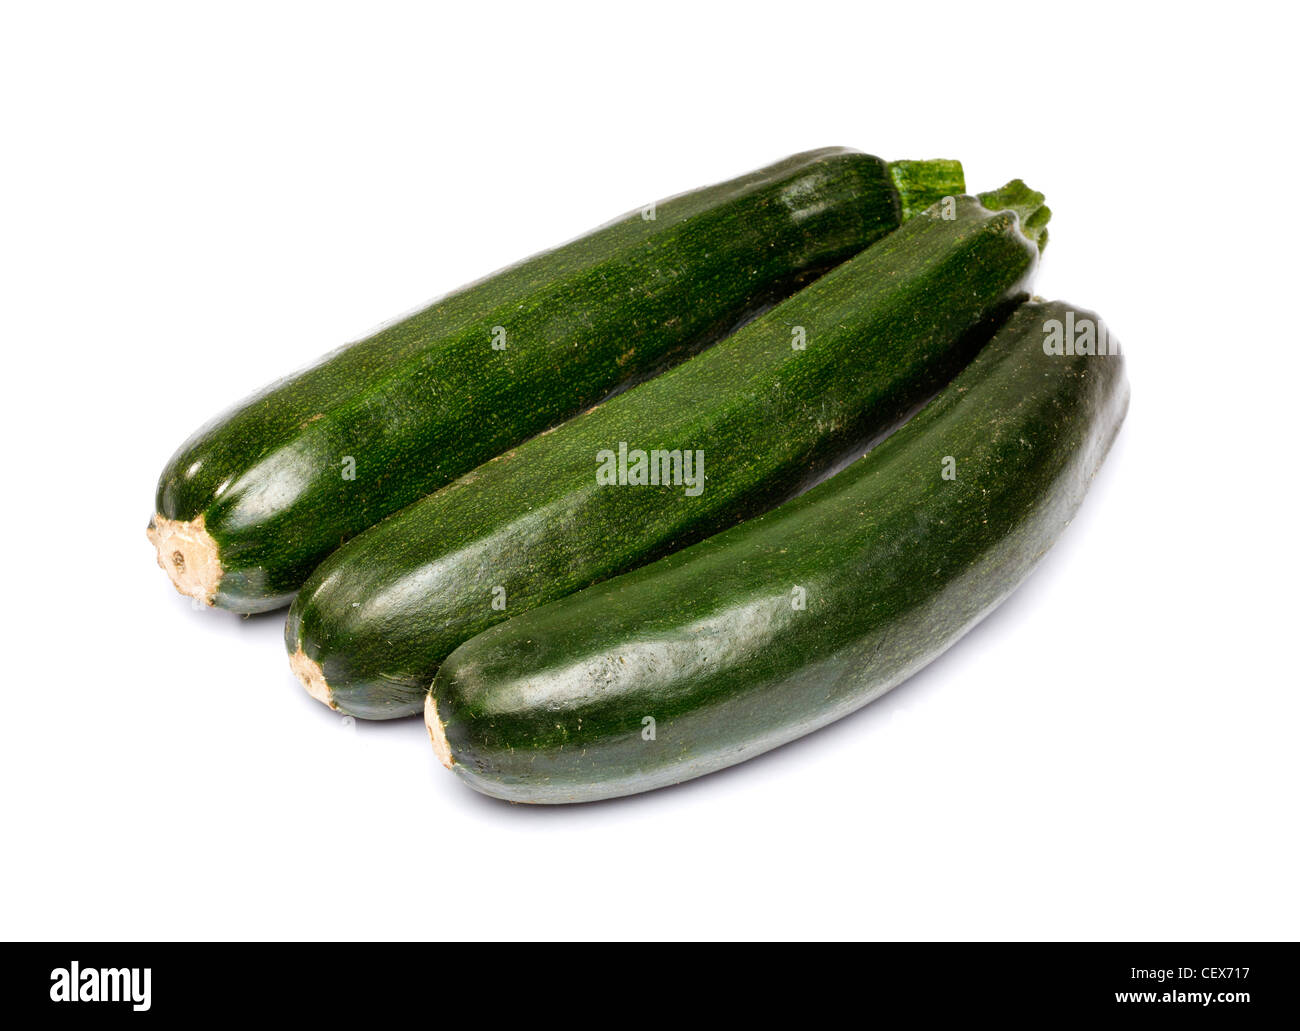 Courgettes on white background Stock Photo